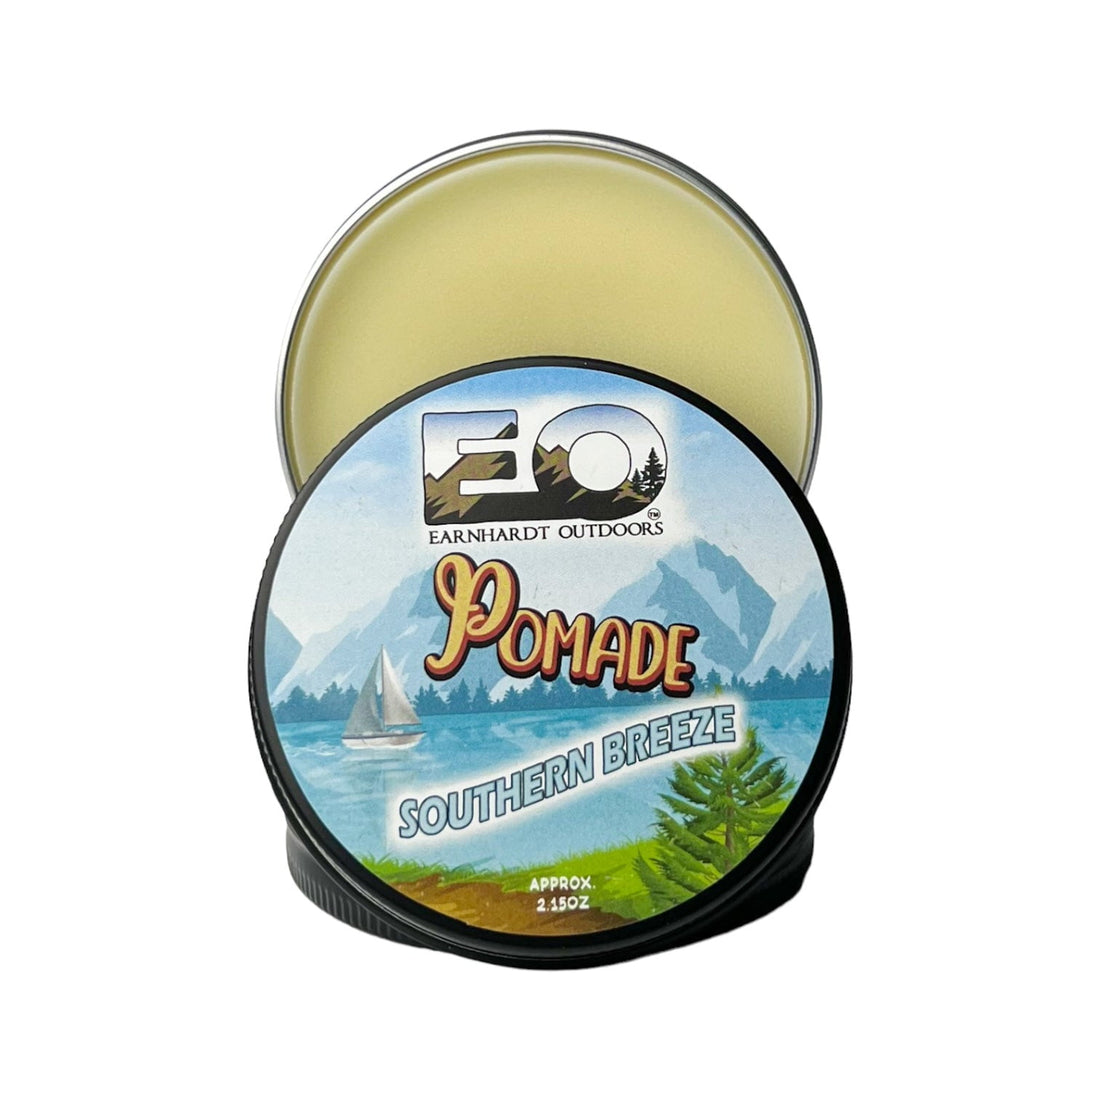 Southern Breeze Earnhardt Outdoors Pomade - Old Town Soap Co.